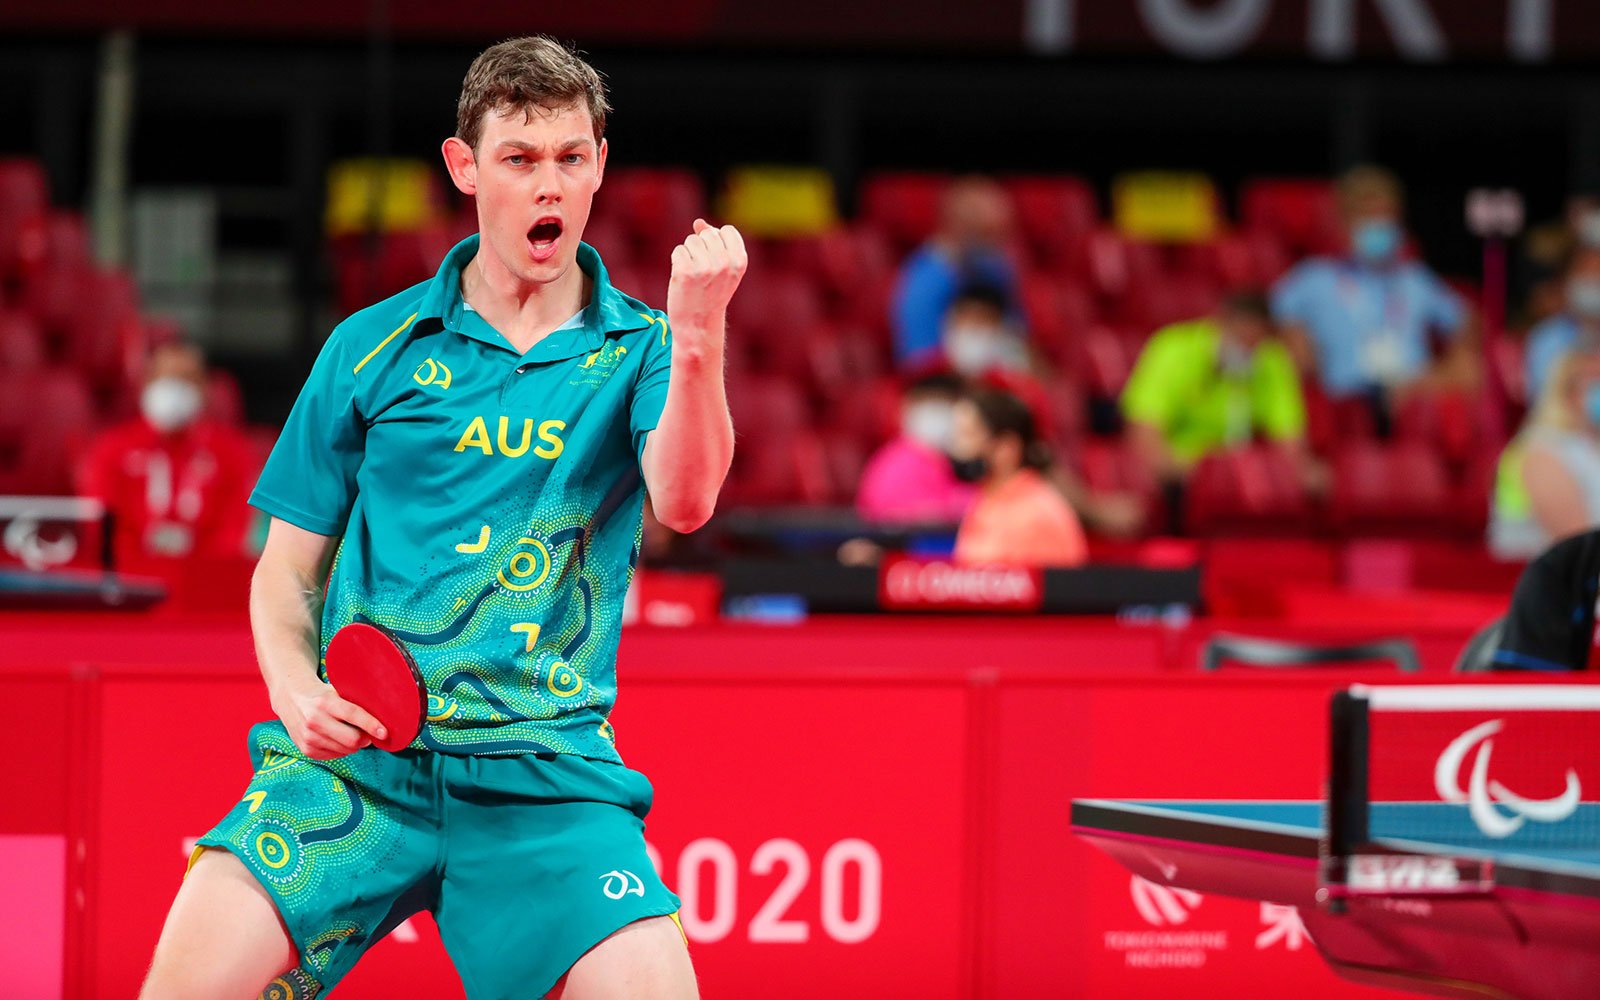 Guaranteed Aussie Medals For Para-table Tennis Stars In Saturday's Epic Line-up